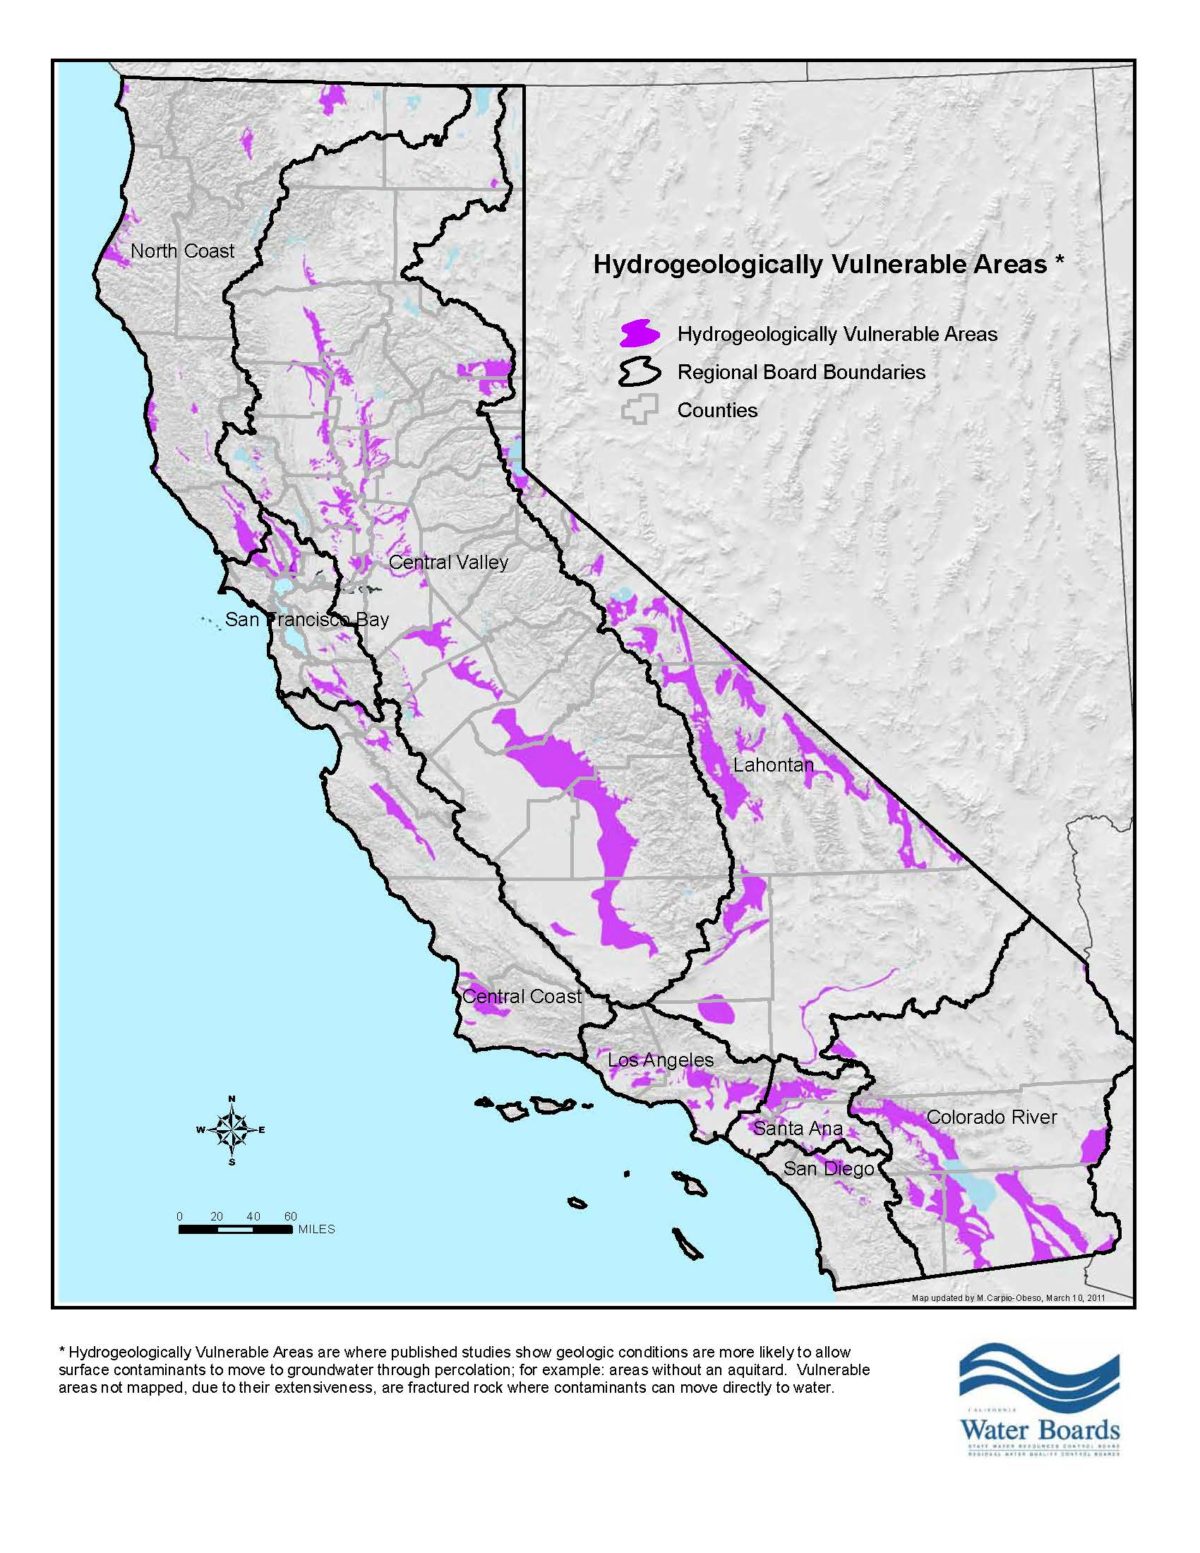 California Hydrogeologically Vulnerable Areas Map